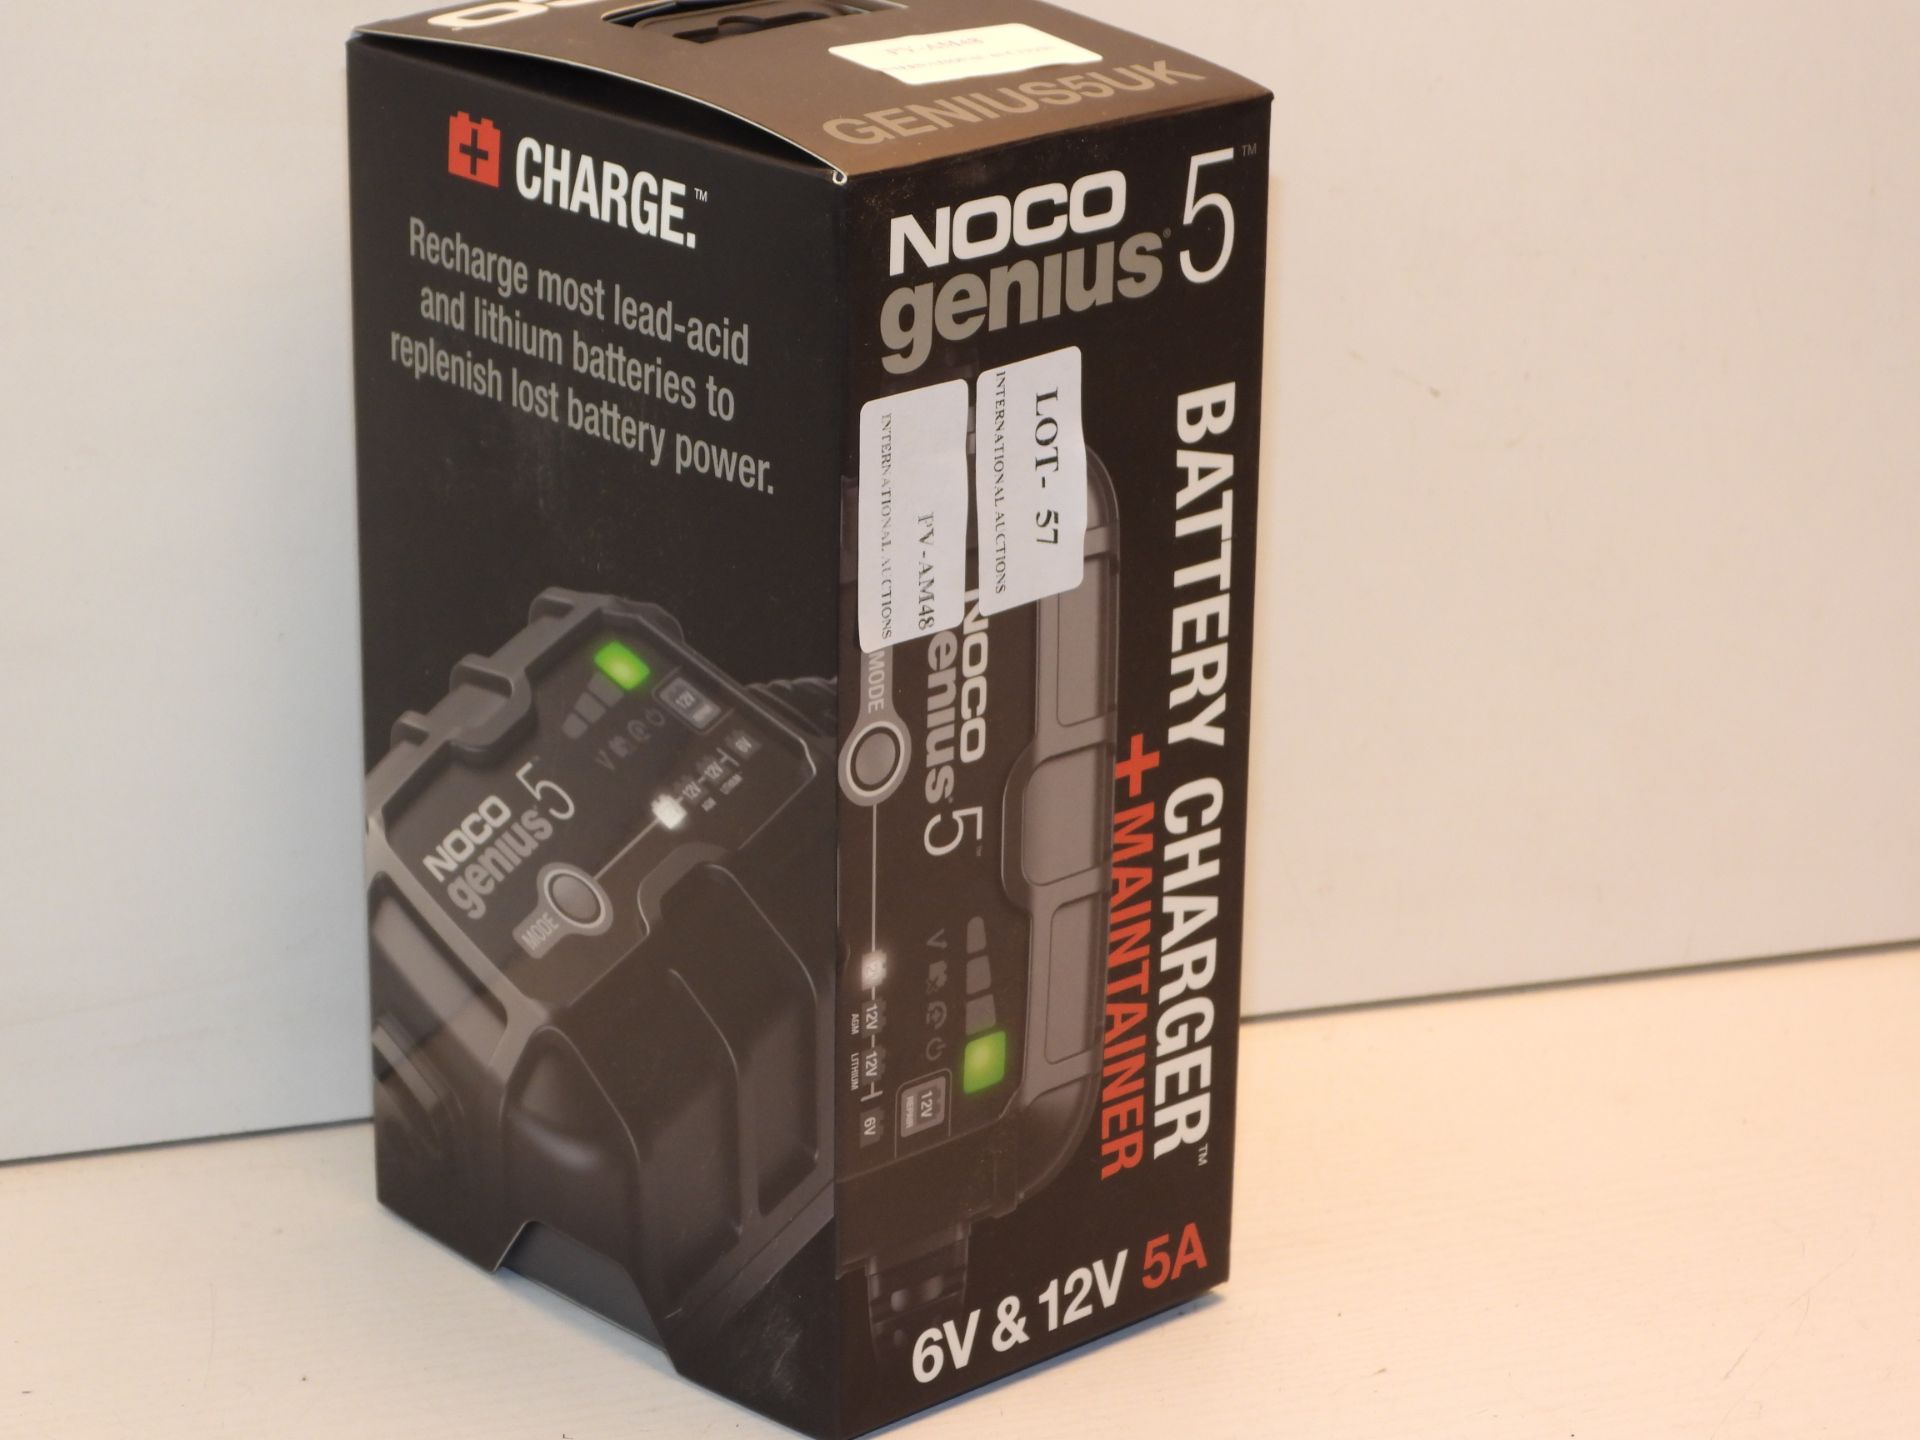 BOXED NOCO GENIUS 5 BATTERY CHARGER & MAINTAINER 6V & 12V 5A RRP £65.99Condition ReportAppraisal